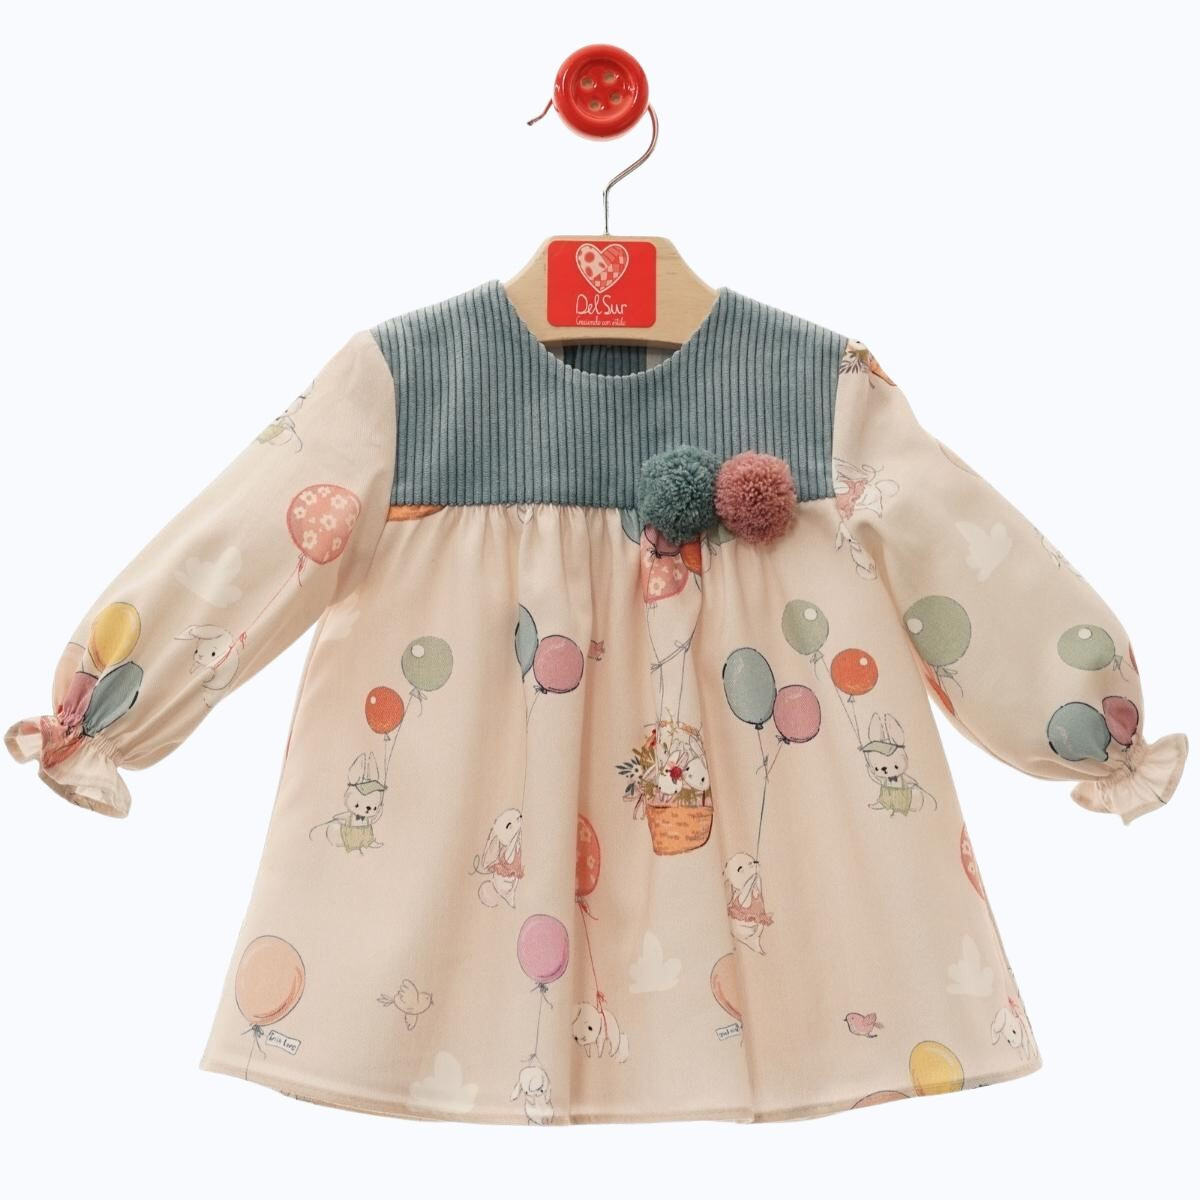 BALLOONS PRINTED DRESS WITH POMPOMS DELSUR - 1